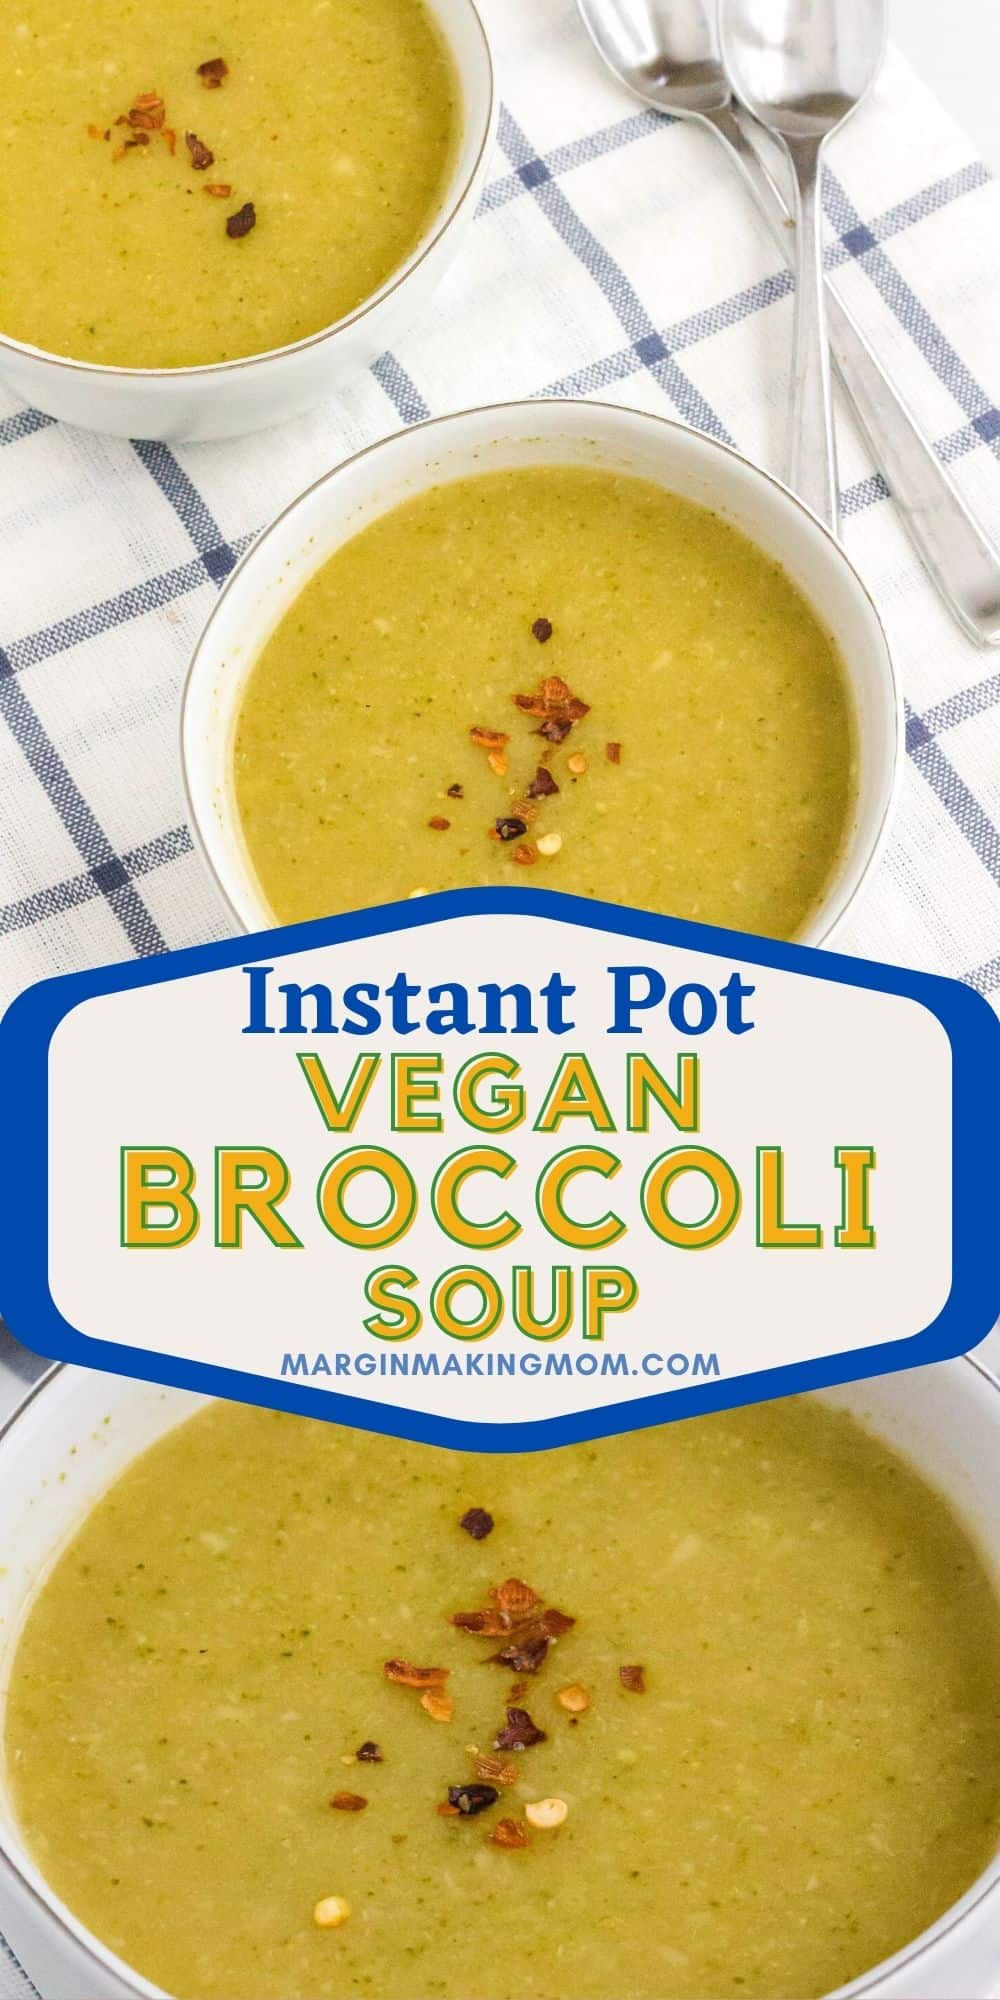 collage image featuring two photos of Instant Pot broccoli soup. One photo is a close-up, showing the soup topped with crushed red pepper flakes for garnish. The other shows two bowls atop a blue and white napkin, with two spoons in the background.